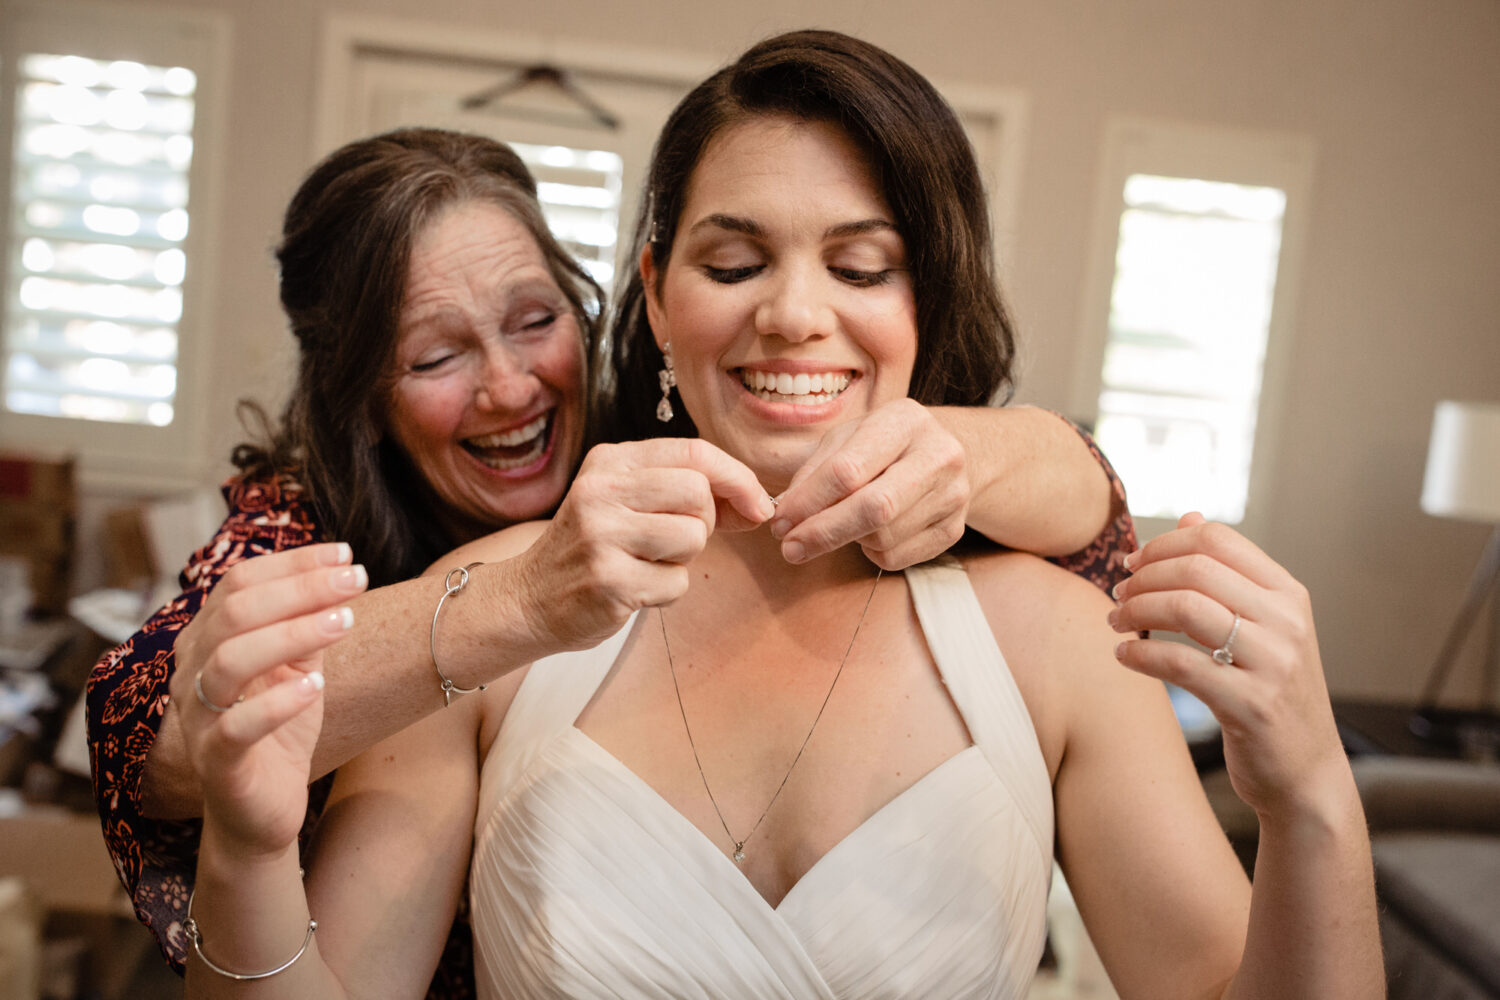 A candid moment shared between the bride and her mother, captured by Lake Tahoe wedding photographer Chris Werner.